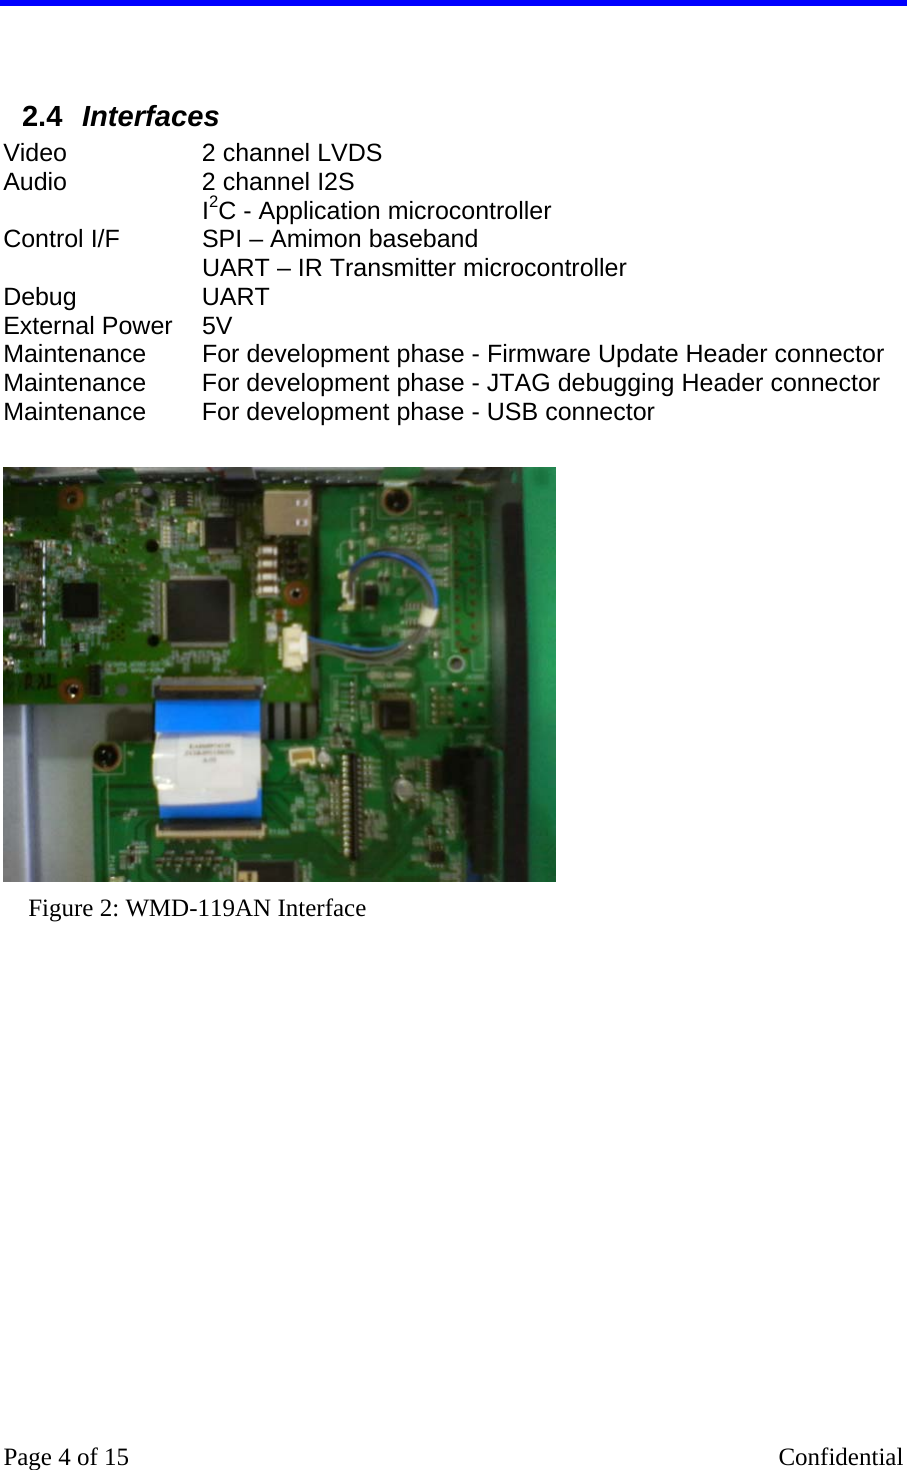    Page 4 of 15    Confidential  2.4  Interfaces Video  2 channel LVDS  Audio  2 channel I2S Control I/F  I2C - Application microcontroller  SPI – Amimon baseband  UART – IR Transmitter microcontroller Debug UART External Power   5V  Maintenance  For development phase - Firmware Update Header connector Maintenance  For development phase - JTAG debugging Header connector Maintenance  For development phase - USB connector   Figure 2: WMD-119AN Interface 